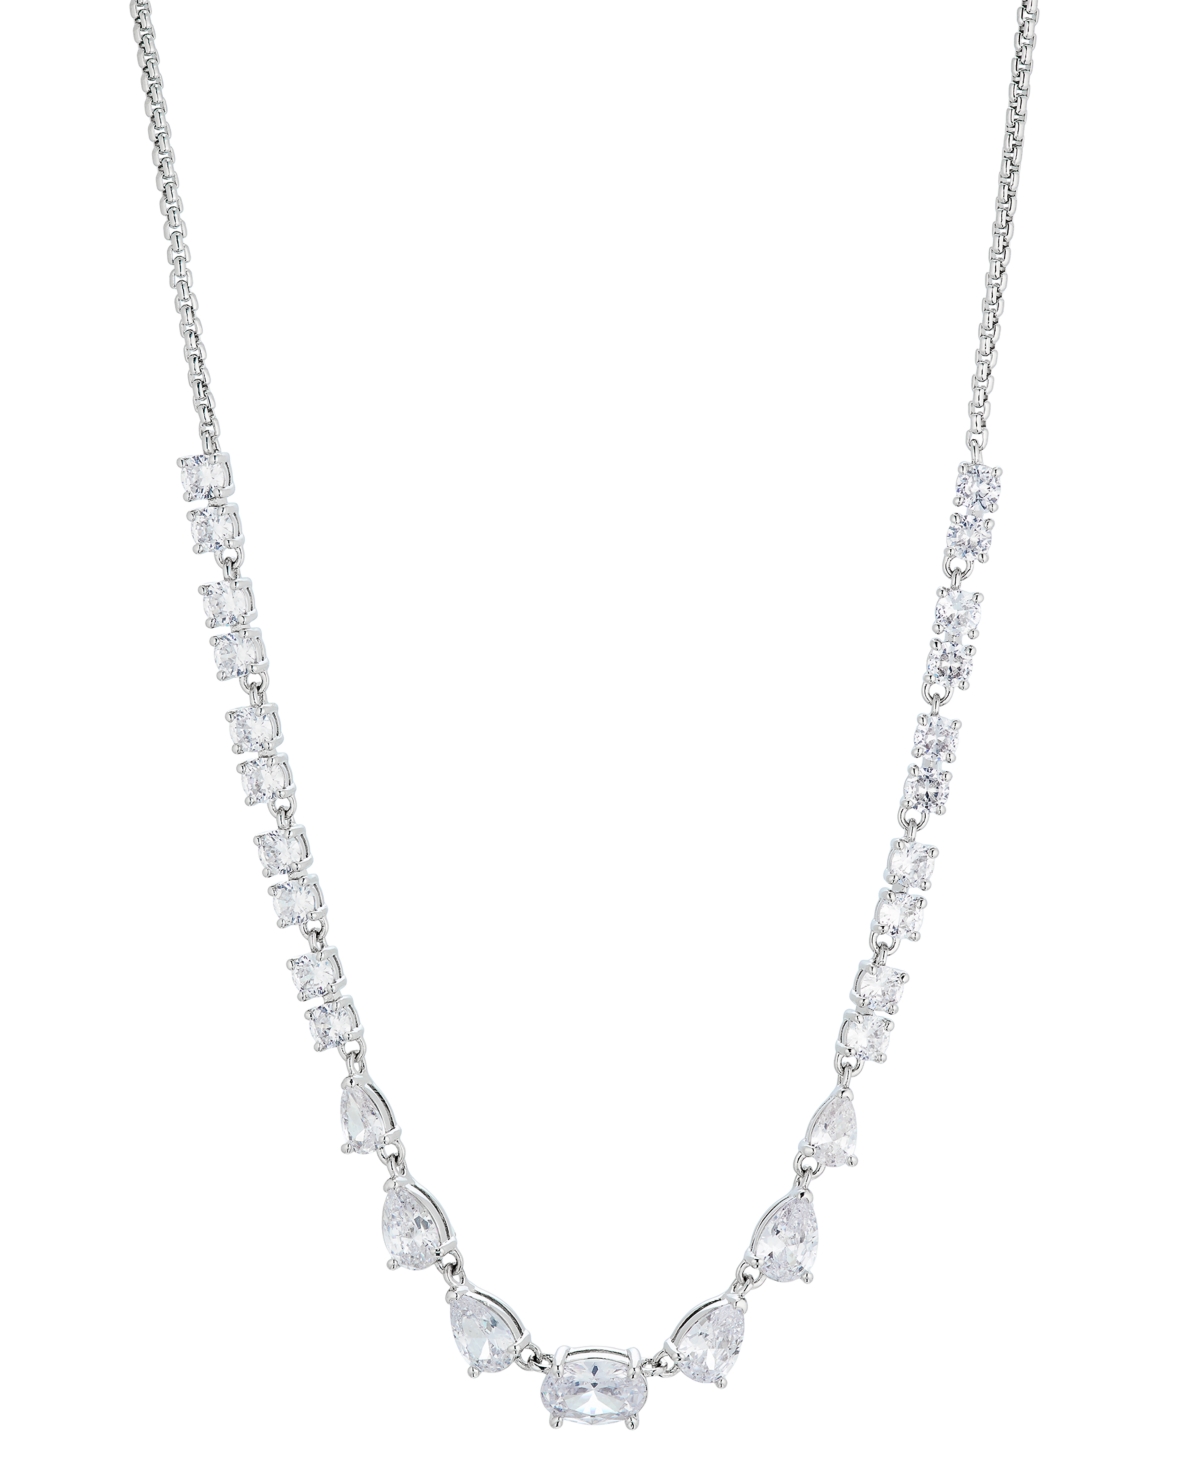 Silver-Tone Mixed Crystal 15" Adjustable Statement Necklace, Created for Macy's - Silver